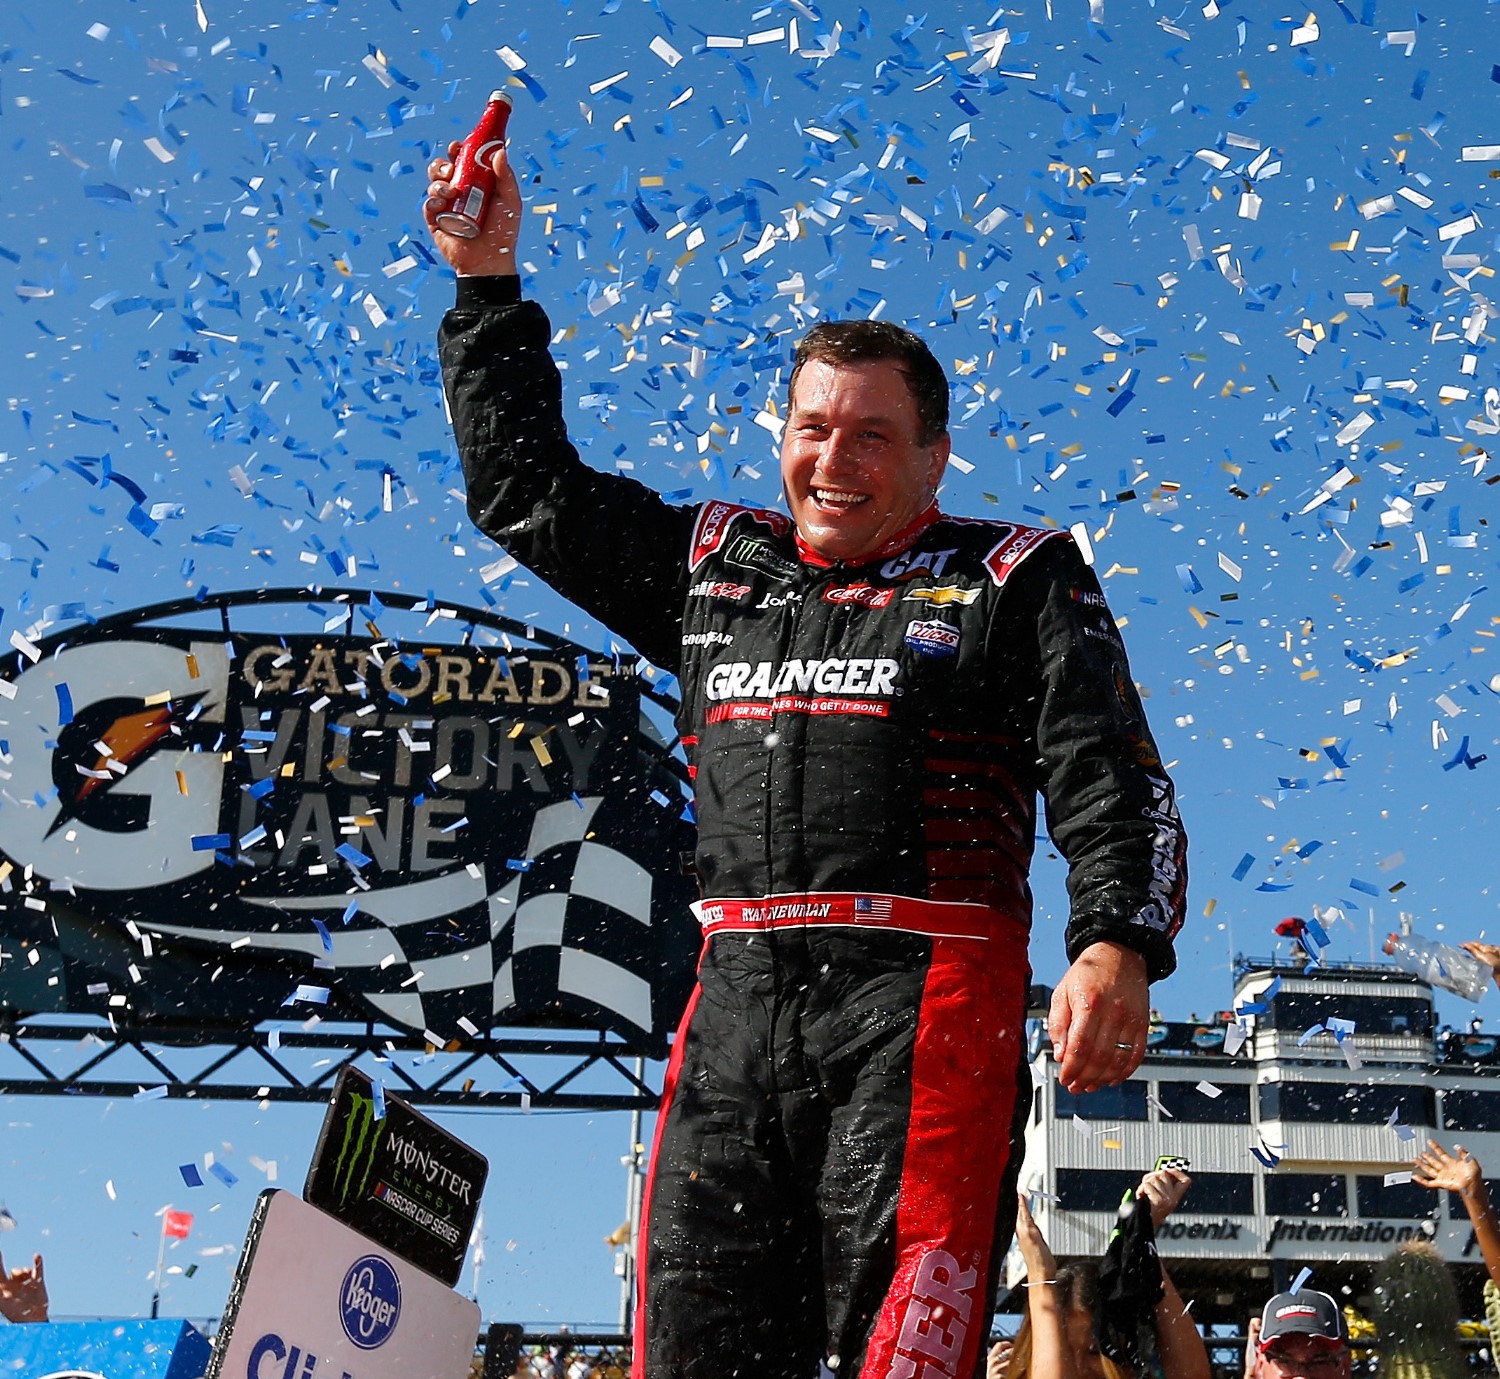 Ryan Newman scored his 18th career NASCAR Monster Energy Cup Series victory today at Phoenix 